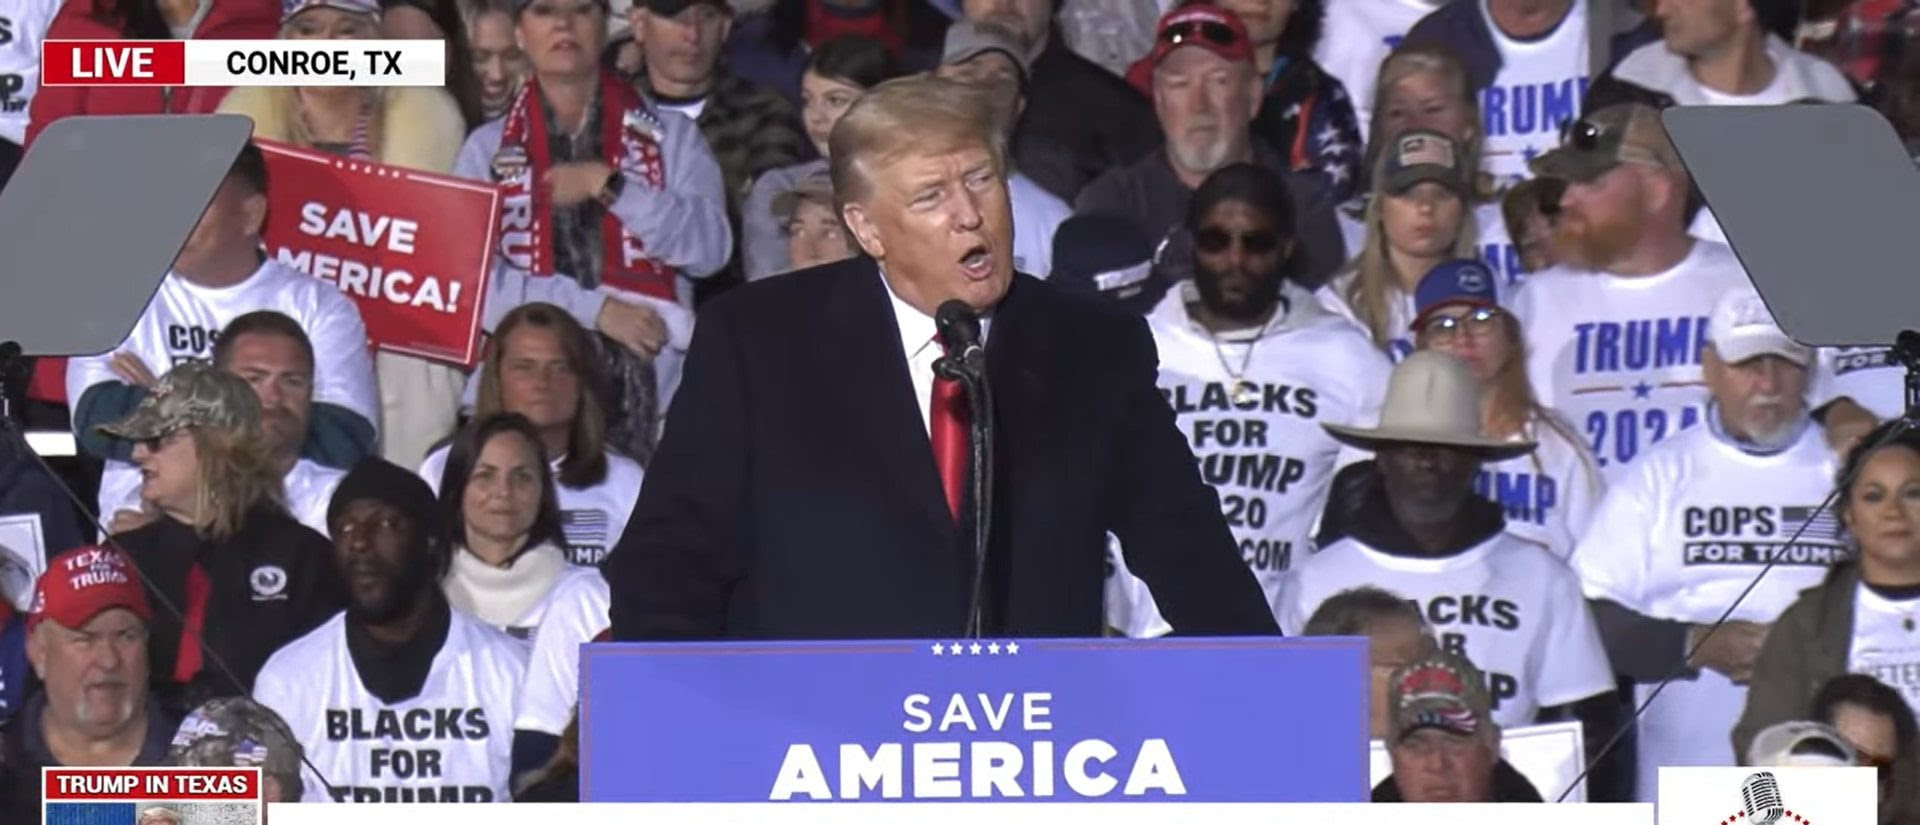 Trump Holds ‘Save America Rally’ In Texas, Slams Biden’s Foreign Policy, ‘Rigged’ Elections